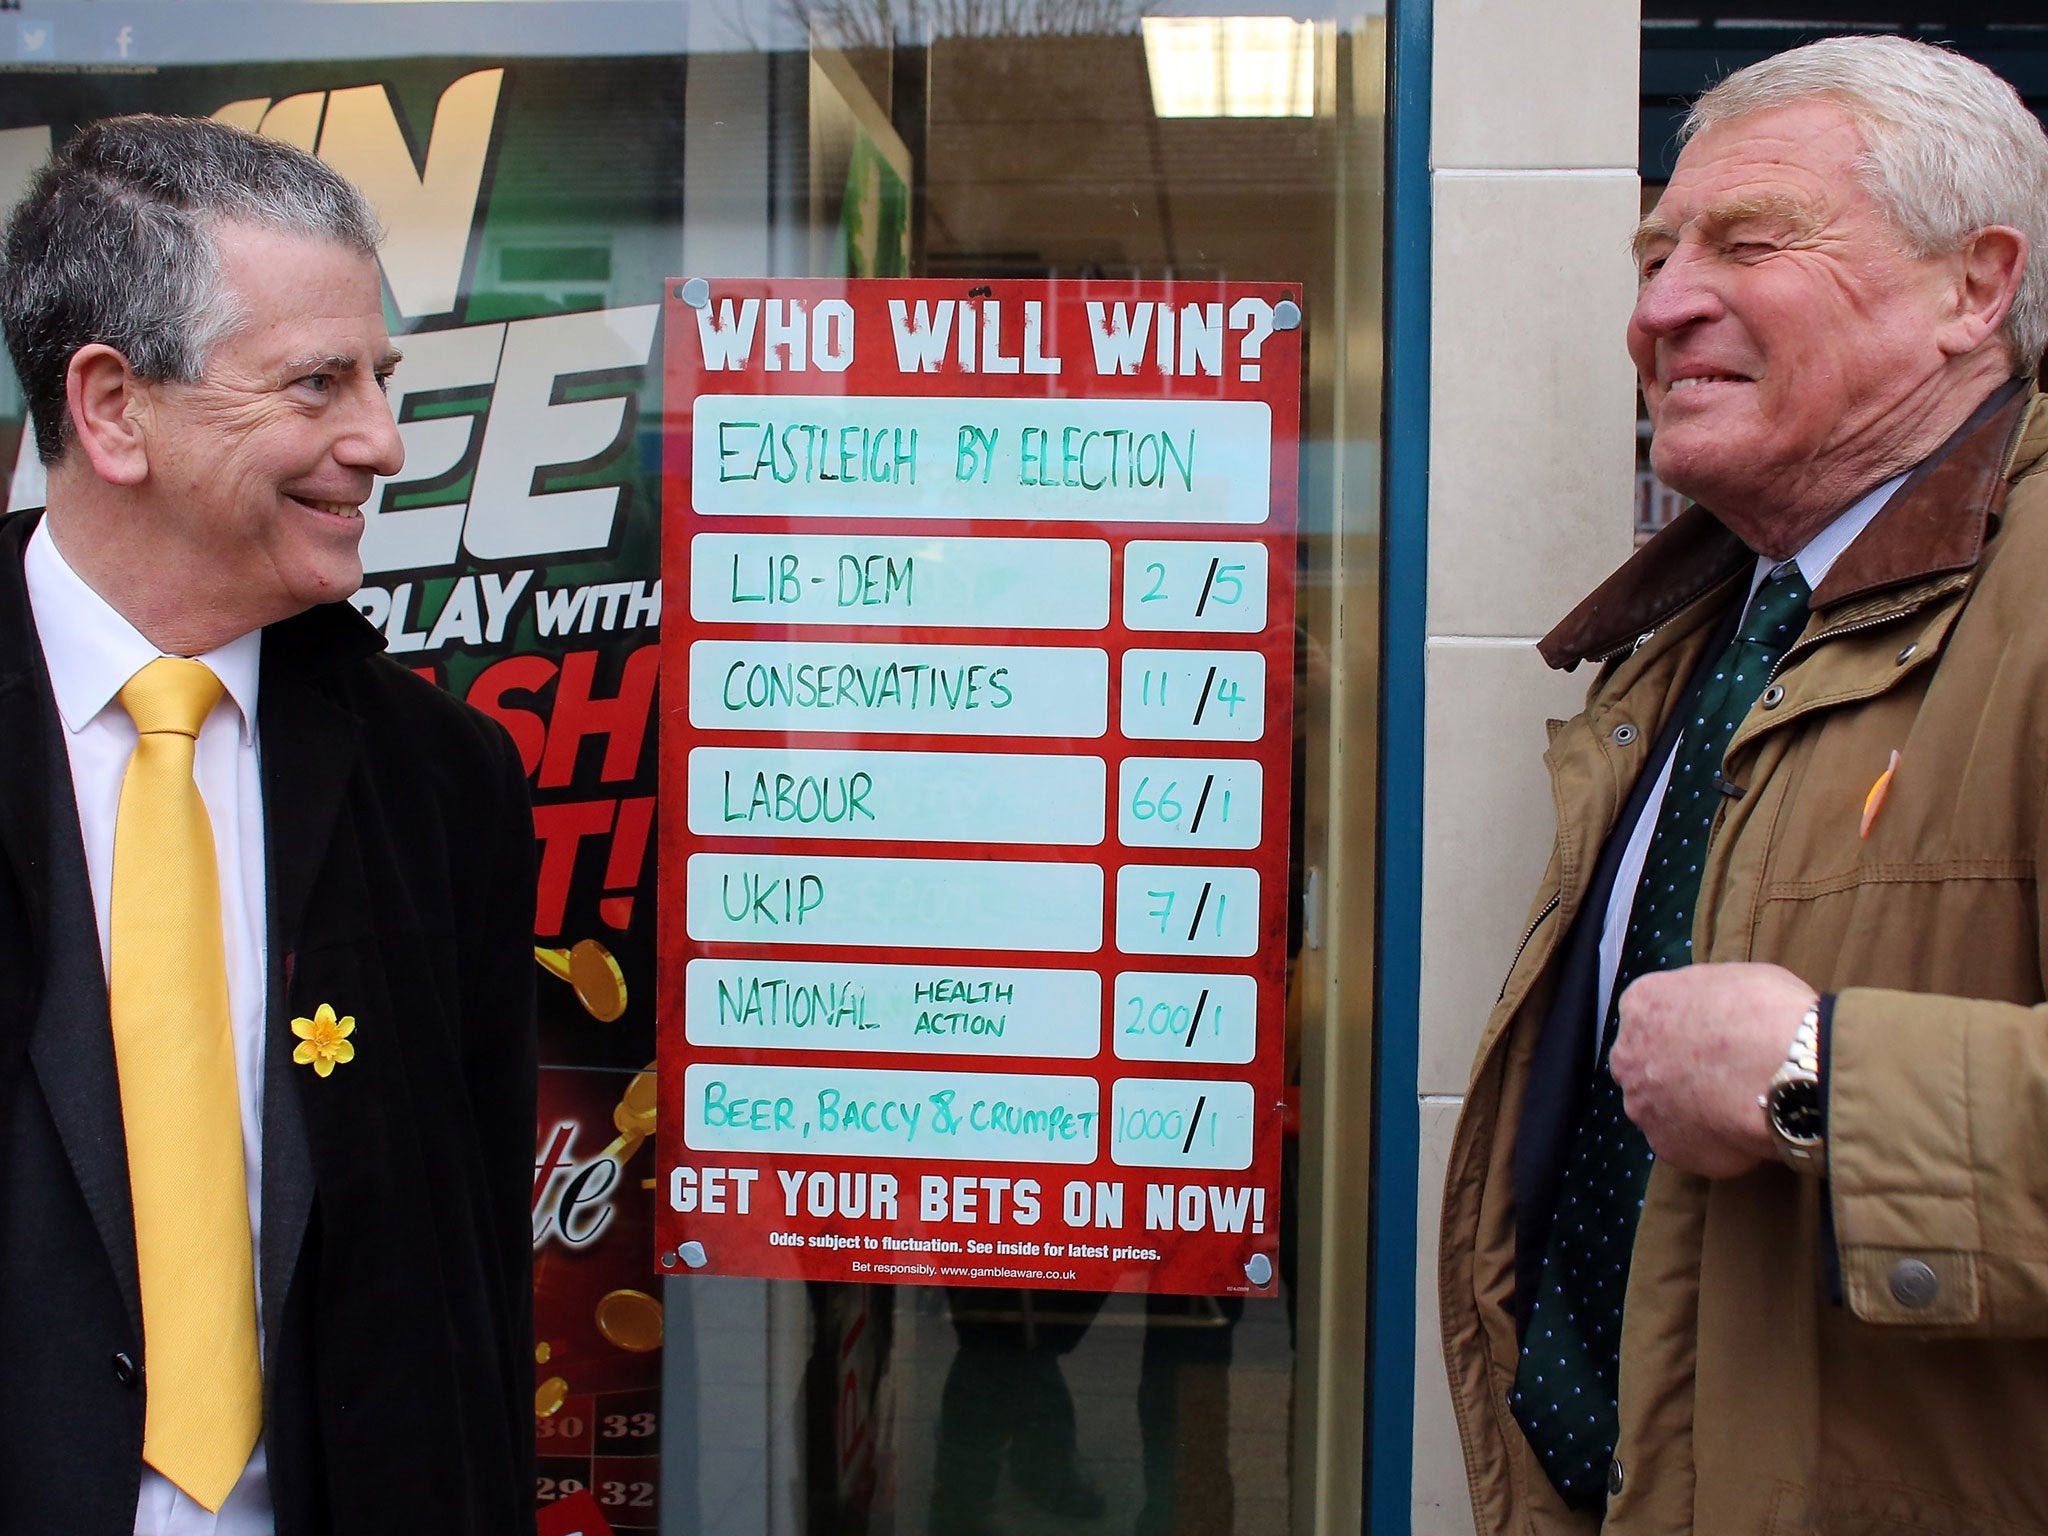 Former Liberal Democrat leader Lord Paddy Ashdown (R) stands beside a bookmakers' odds for the election as he campaigns with Liberal Democrat candidate Mike Thornton (L) for the forthcoming by-election on February 26, 2013 in Eastleigh, England.